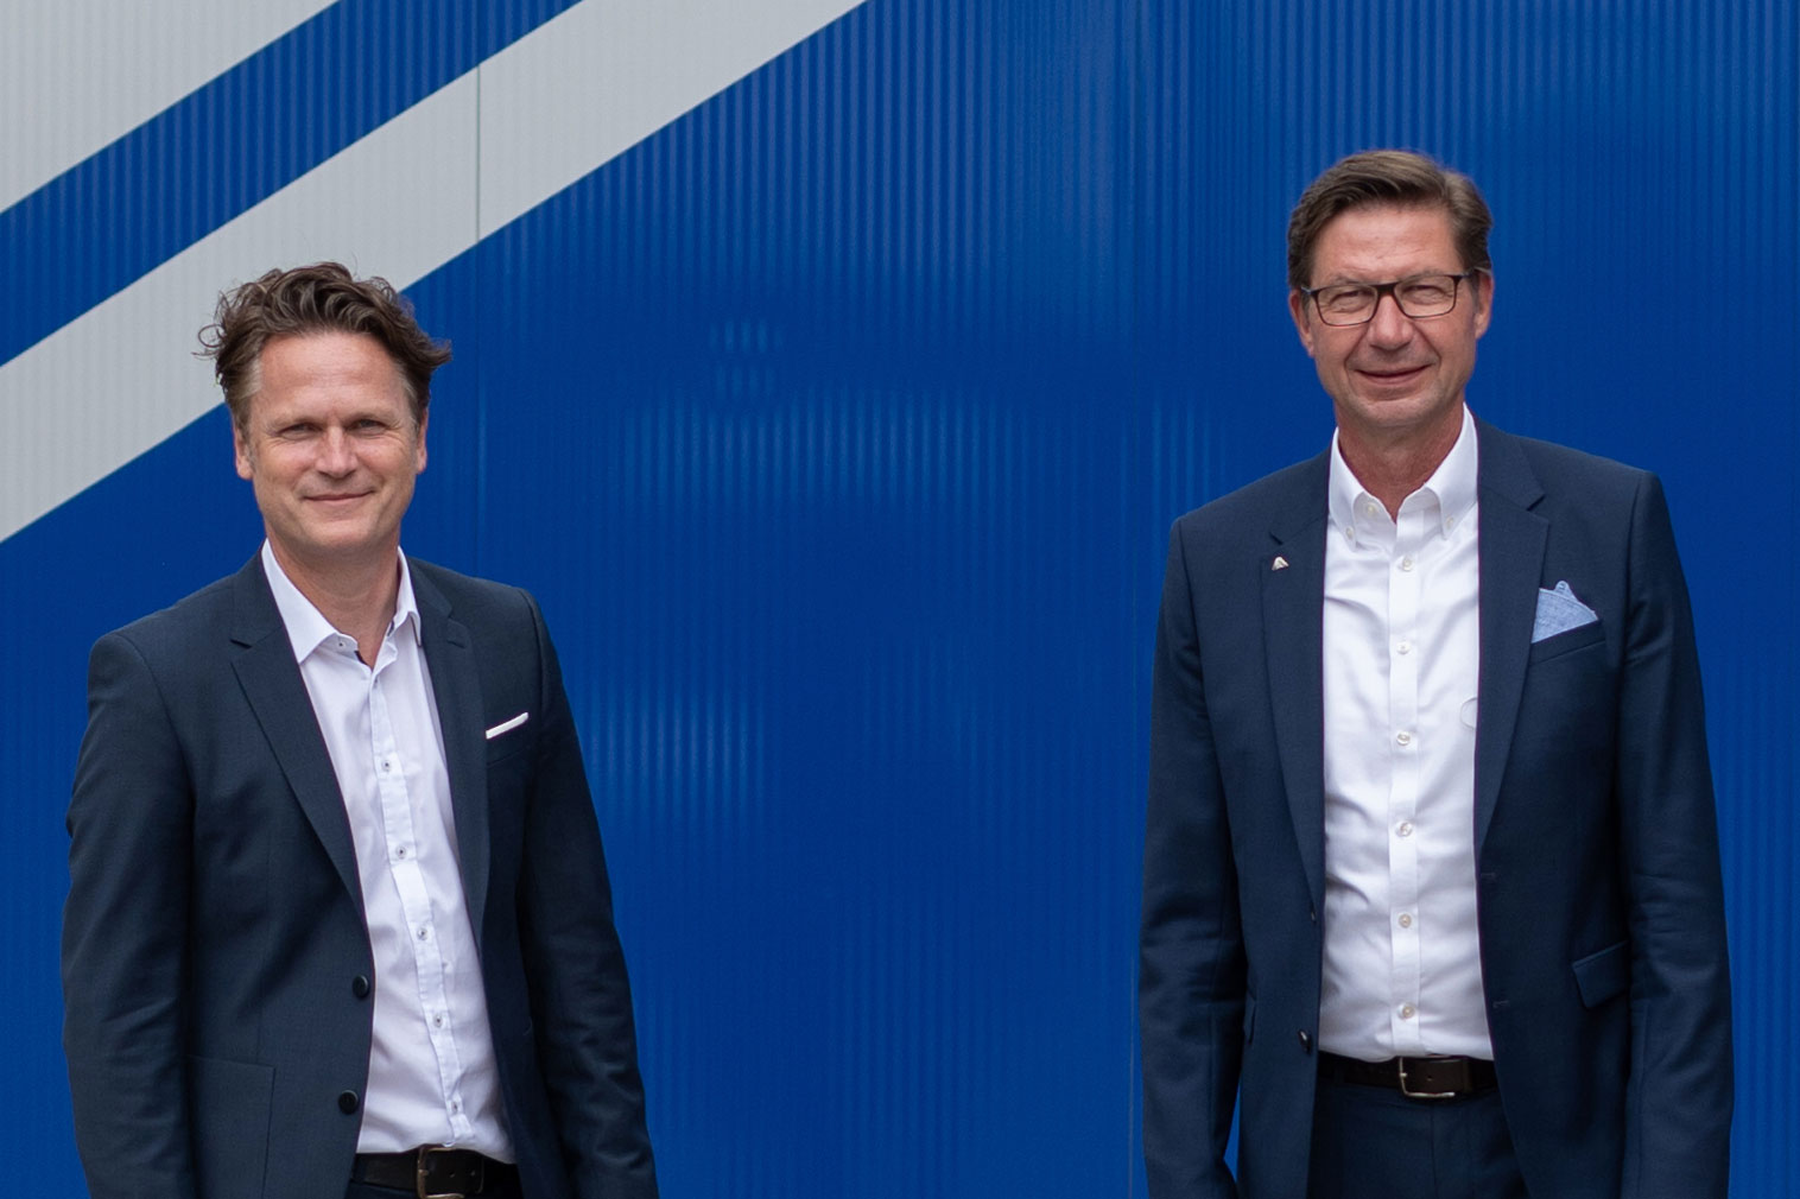 Since August 2021, Dr. Thomas Barthel has been the new Sales Manager of Paul Vahle GmbH & Co. KG. Here together with VAHLE Managing Director Achim Dries. (Photo: VAHLE)